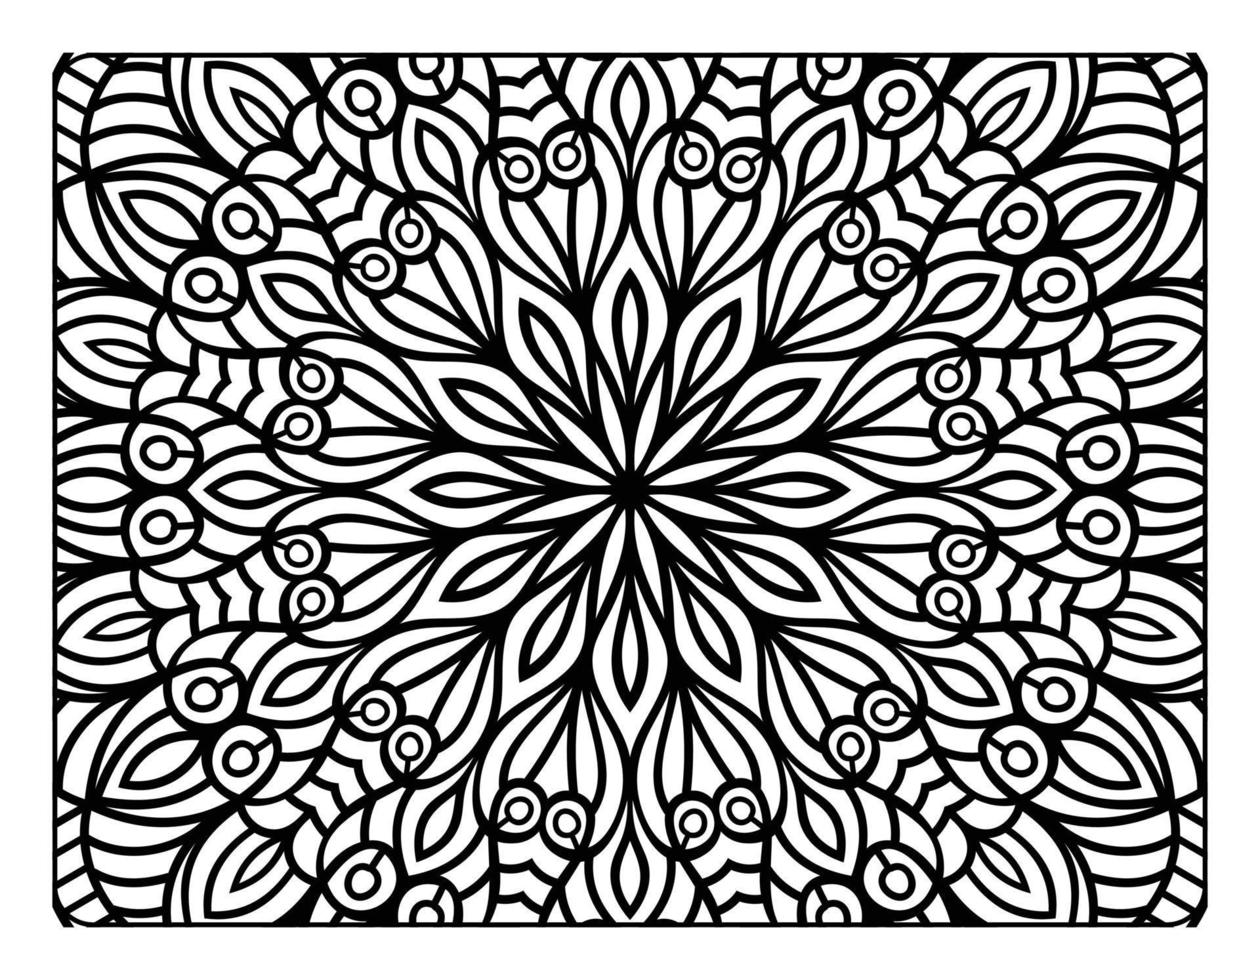 Mandala floral coloring page for adult coloring book, black and white mandala coloring page, hand drawn outlined doodle line art for adult coloring page interior vector